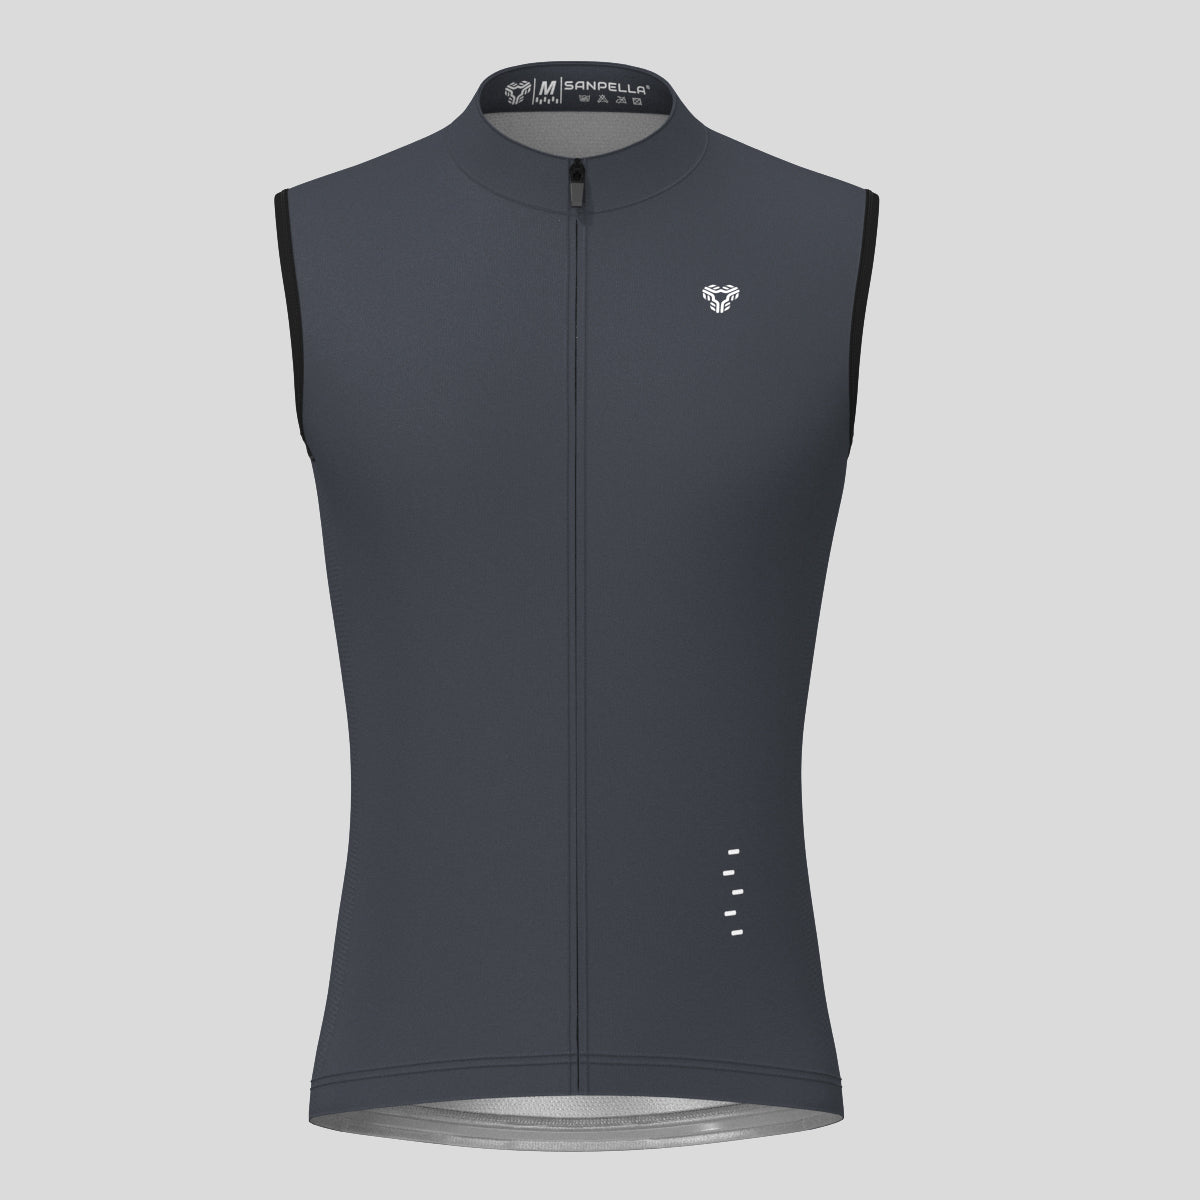 Men's Minimal Solid Sleeveless Cycling Jersey - Graphite